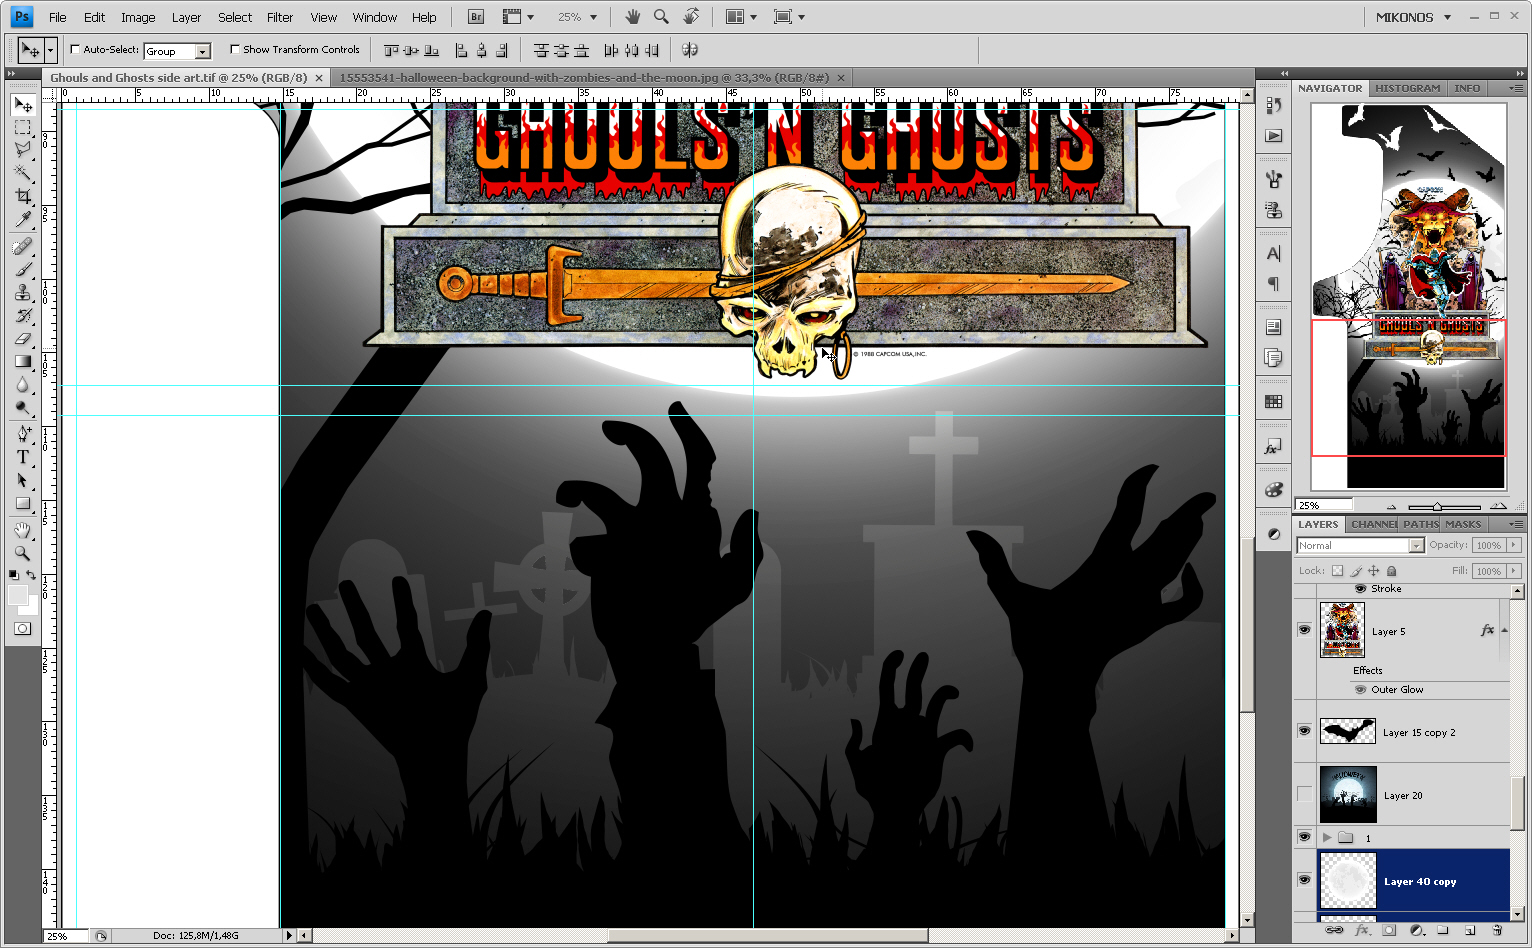 Ghouls%20and%20Ghosts%20Side%20Joseman3